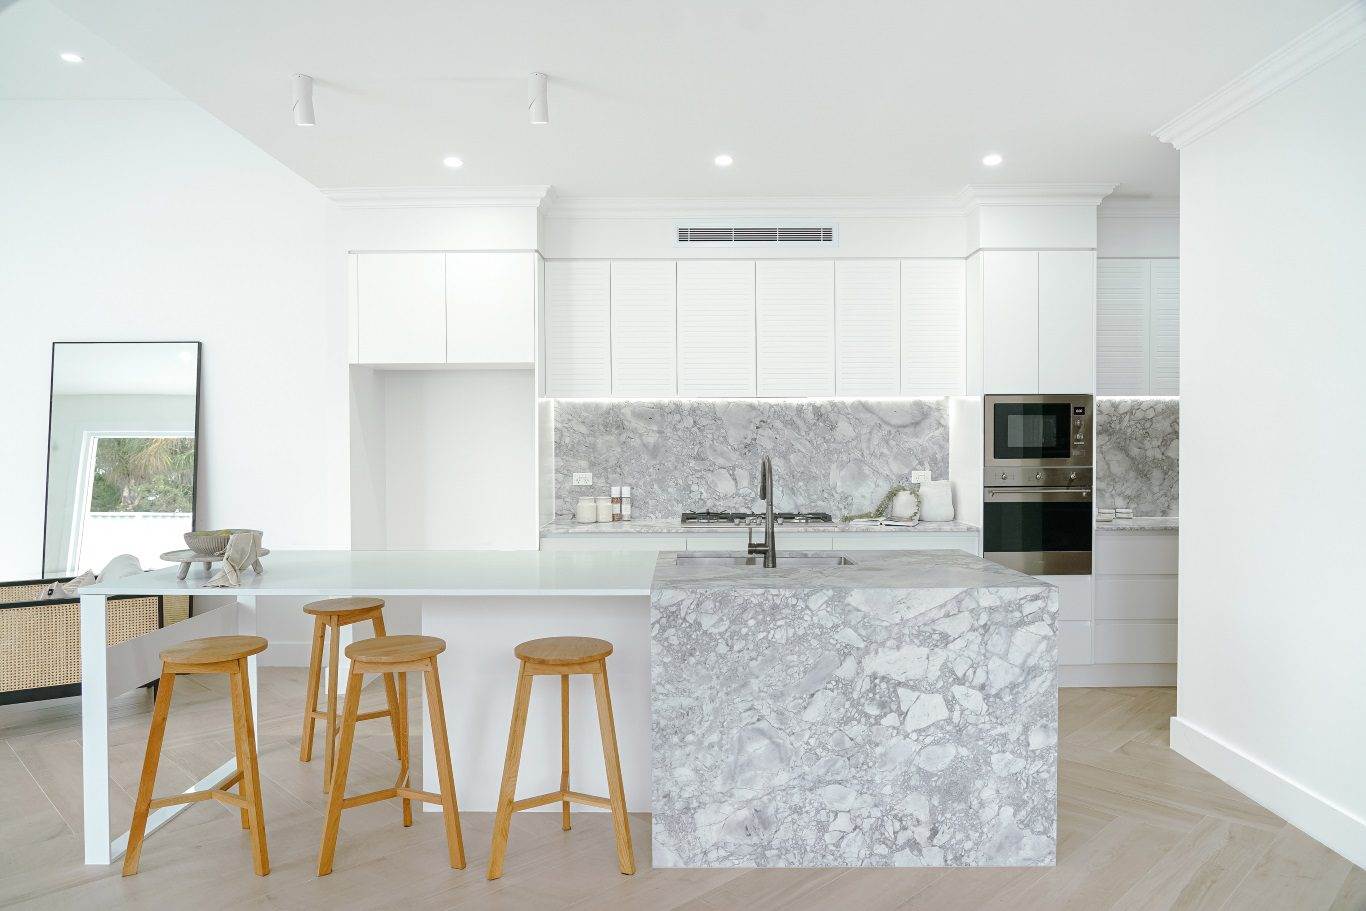 CARINGBAH SOUTH PROJECT show tile project